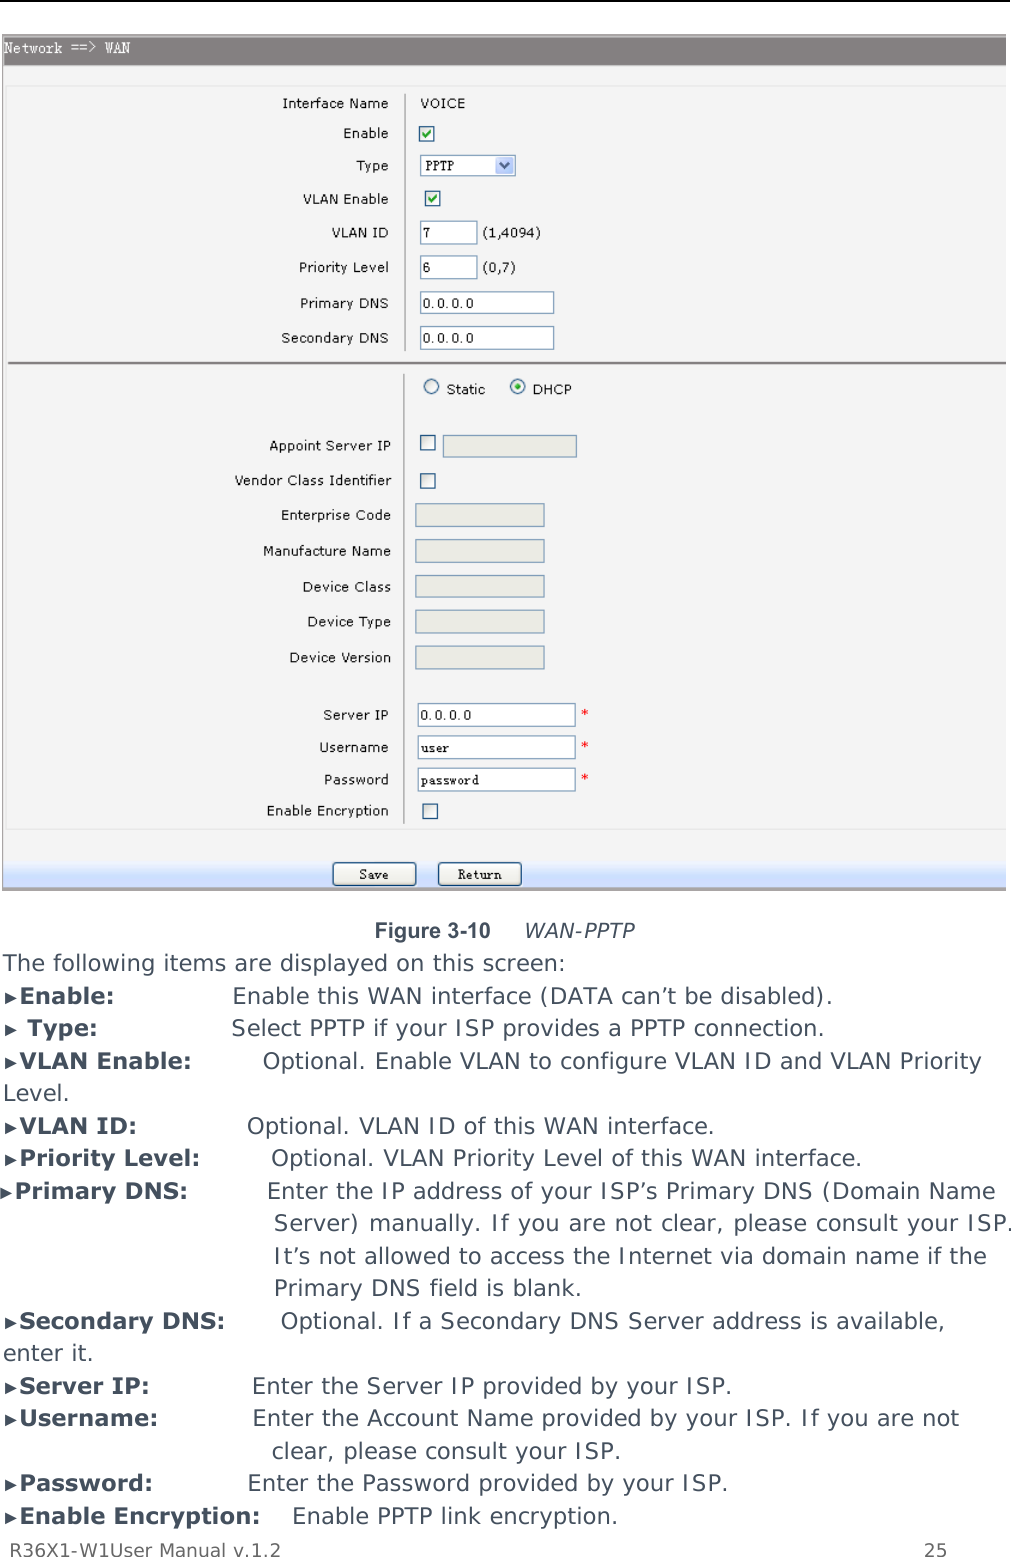           R36X1-W1User Manual v.1.2    25   Figure 3-10  WAN-PPTP The following items are displayed on this screen: ►Enable:               Enable this WAN interface (DATA can’t be disabled). ► Type:                 Select PPTP if your ISP provides a PPTP connection. ►VLAN Enable:         Optional. Enable VLAN to configure VLAN ID and VLAN Priority Level. ►VLAN ID:              Optional. VLAN ID of this WAN interface. ►Priority Level:         Optional. VLAN Priority Level of this WAN interface. ►Primary DNS:          Enter the IP address of your ISP’s Primary DNS (Domain Name Server) manually. If you are not clear, please consult your ISP. It’s not allowed to access the Internet via domain name if the Primary DNS field is blank. ►Secondary DNS:       Optional. If a Secondary DNS Server address is available, enter it. ►Server IP:             Enter the Server IP provided by your ISP. ►Username:            Enter the Account Name provided by your ISP. If you are not clear, please consult your ISP. ►Password:            Enter the Password provided by your ISP. ►Enable Encryption:    Enable PPTP link encryption. 